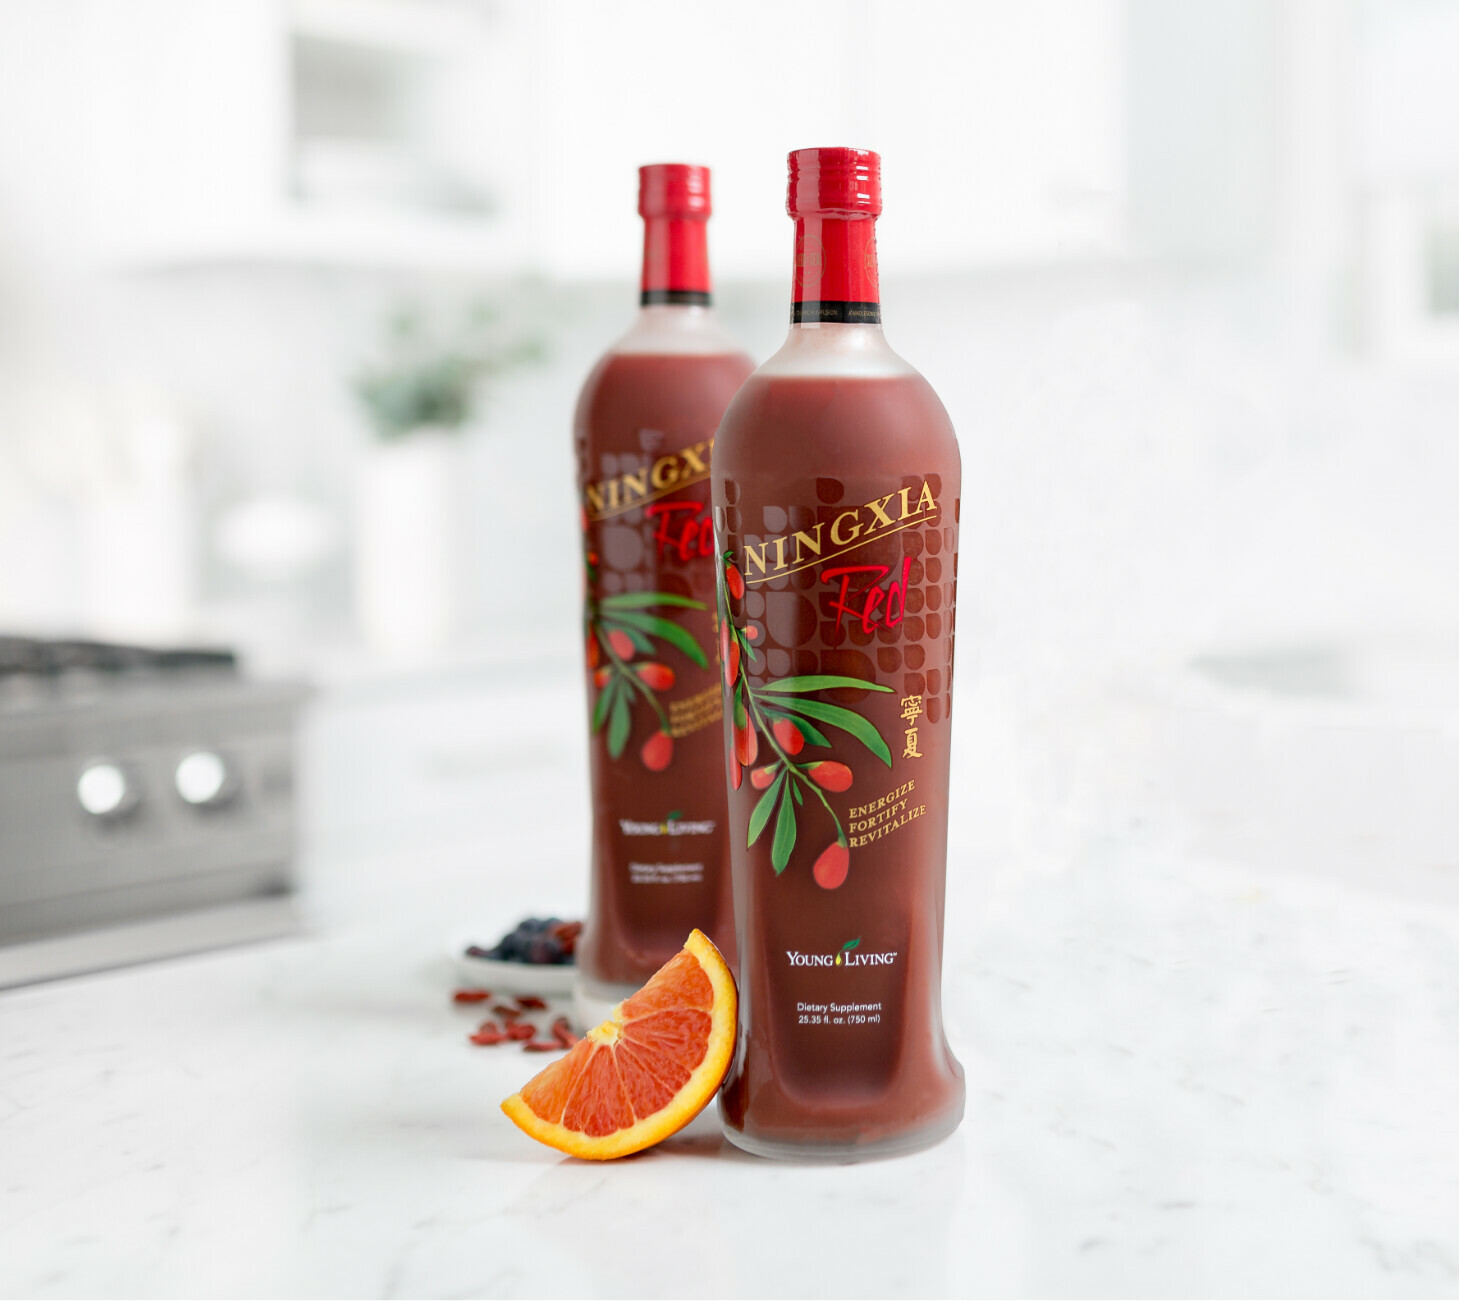 NingXia Red Energy, Sleep, Stress, and Mobility September Challenge! 